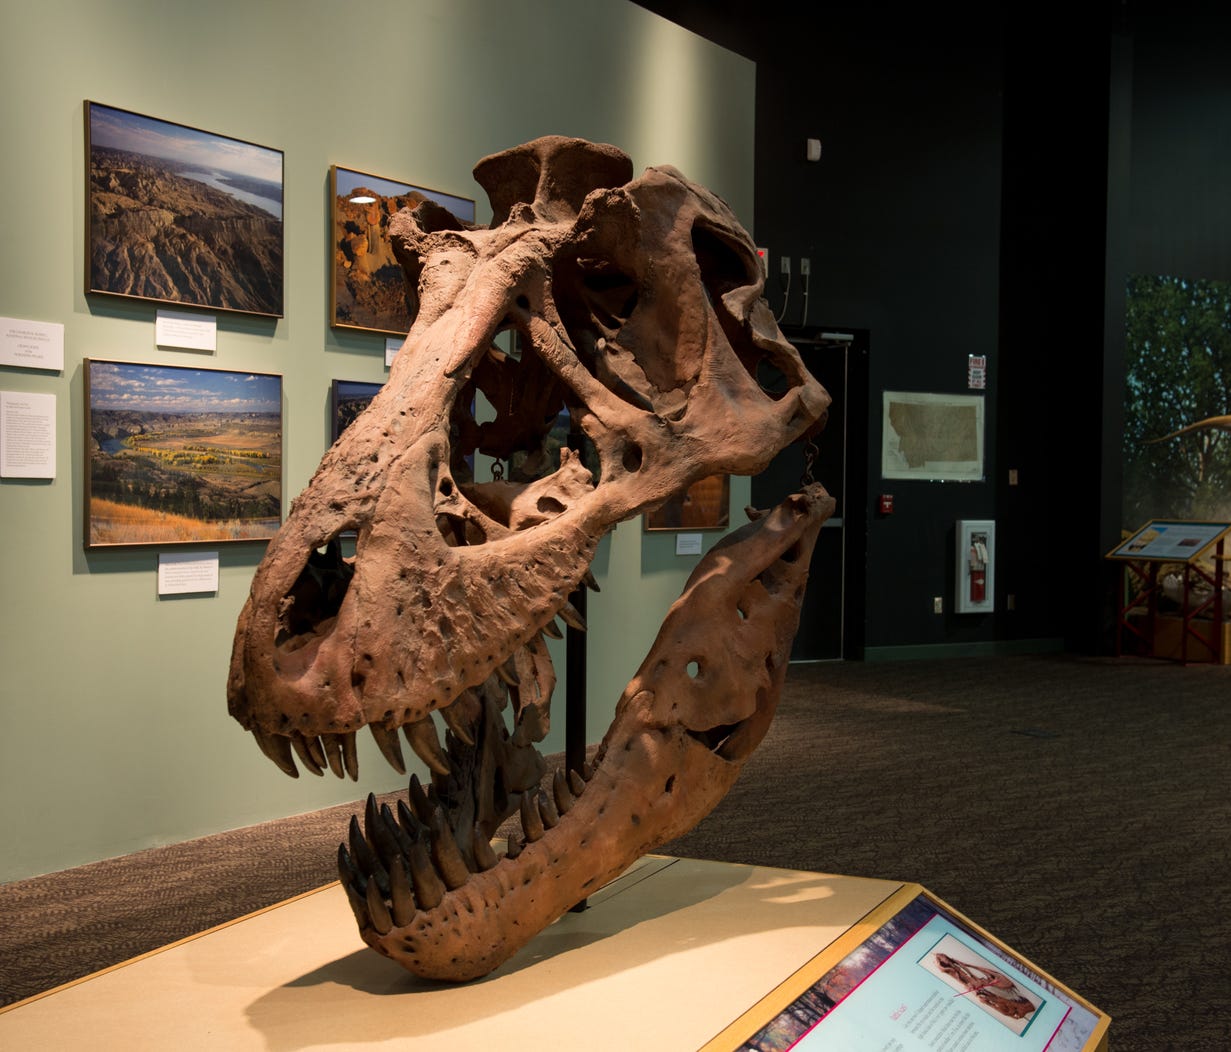 An exhibit of Peck's Rex's skull, one of the most complete T. rex skeletons ever found and found near Fort Peck-at the Fort Peck Interpretive Center in Fort Peck, Montana.